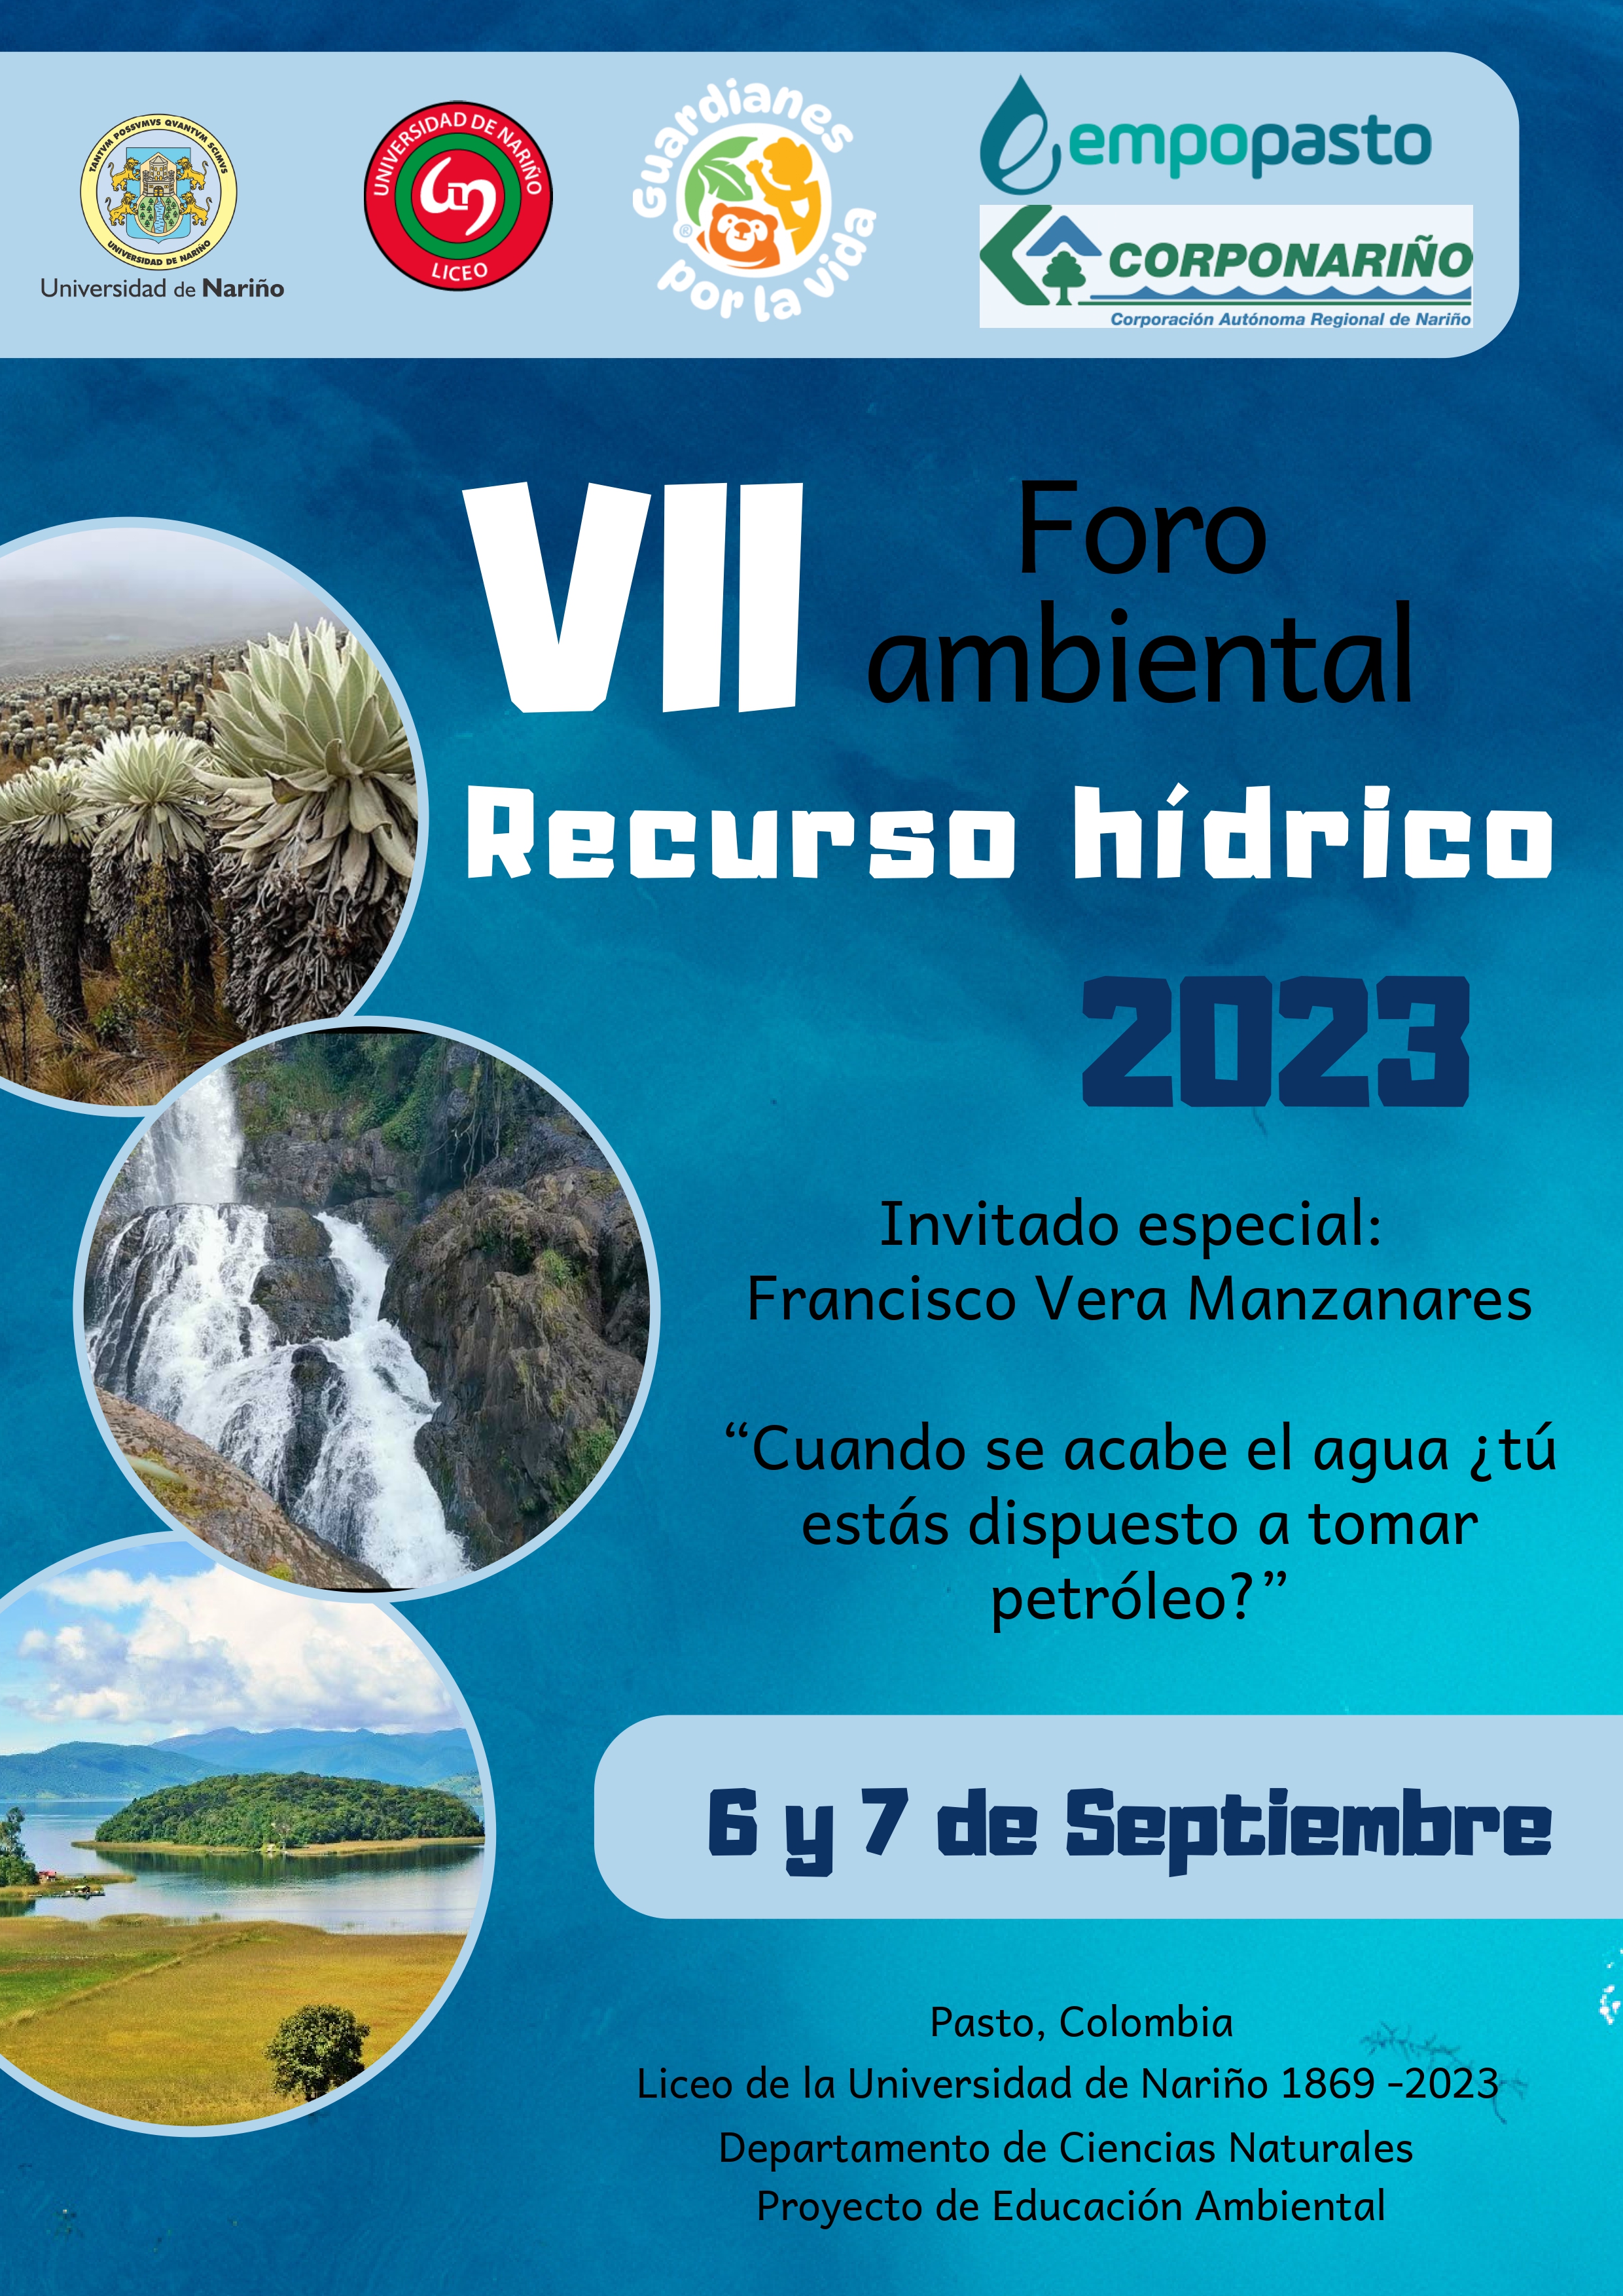 VII FORO AMBIENTAL POSTER (1)_page-0001